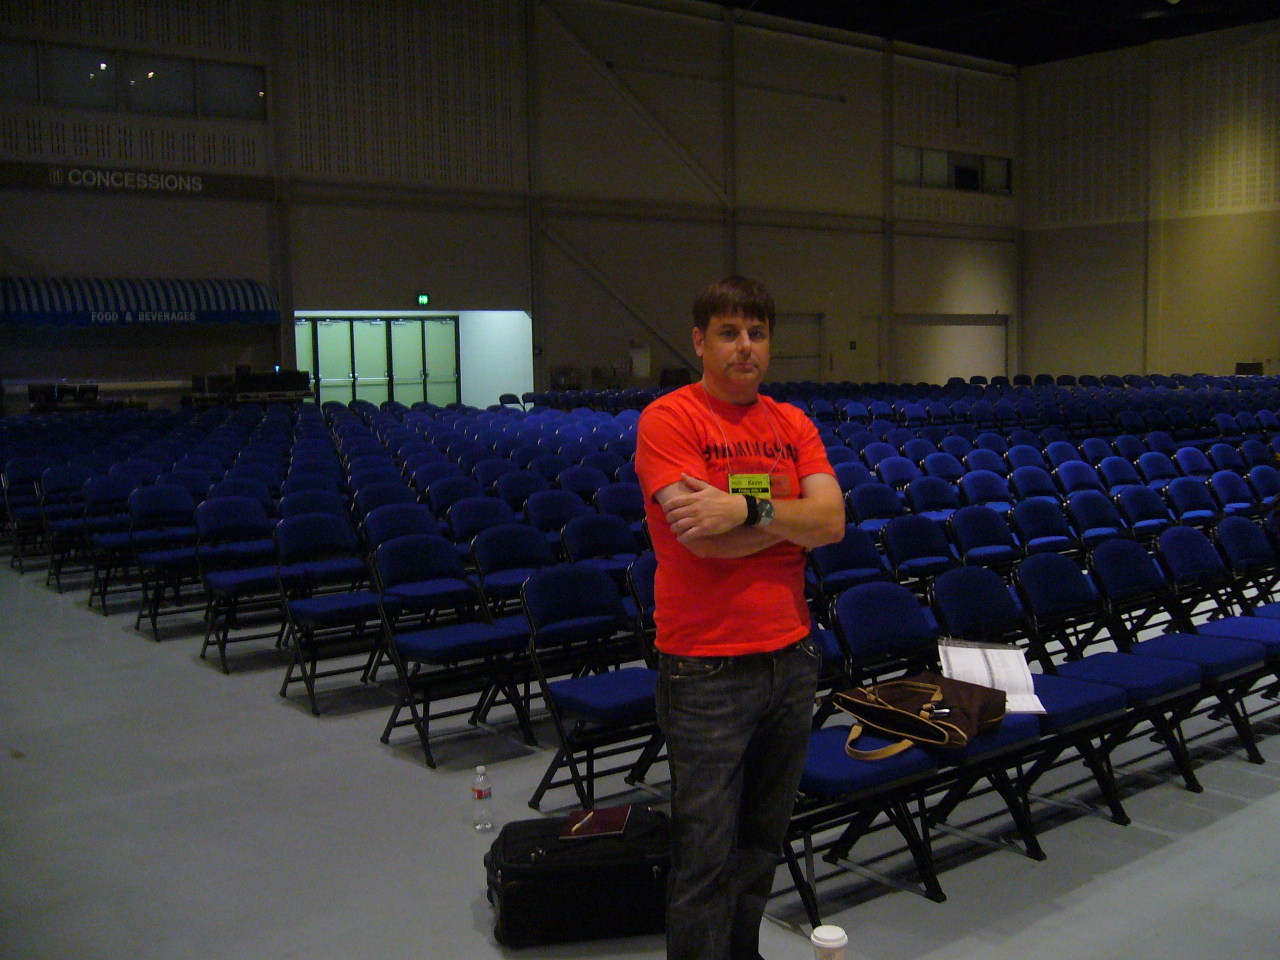 Kevin Booth at lecture sound check NACA convention Ontario CA